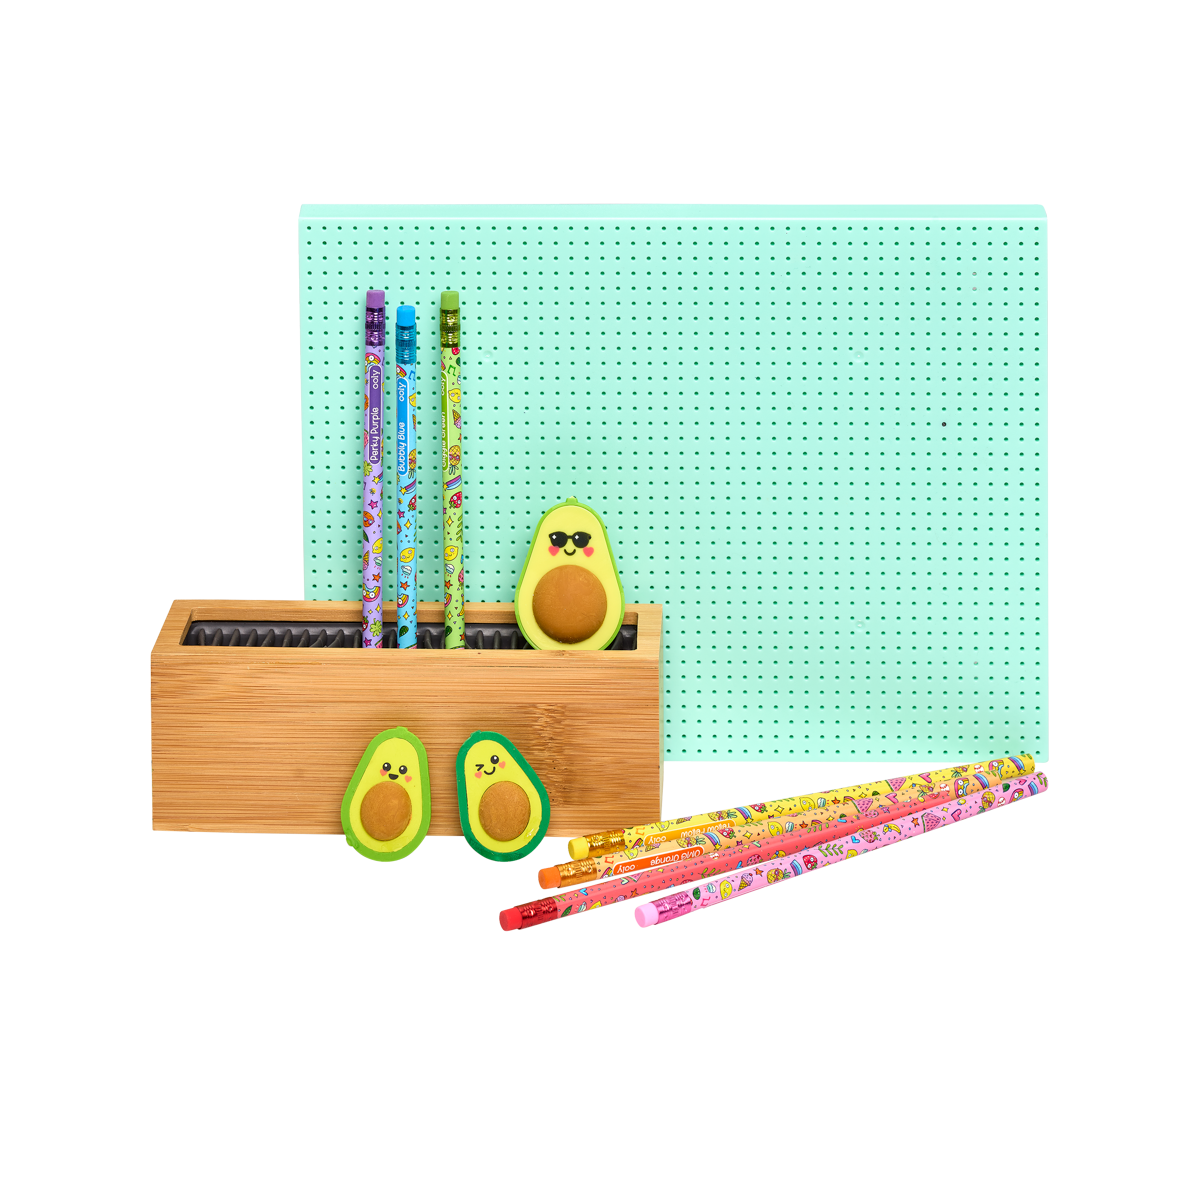 OOLY Avocado Love Eraser and Sharpener demo with other products